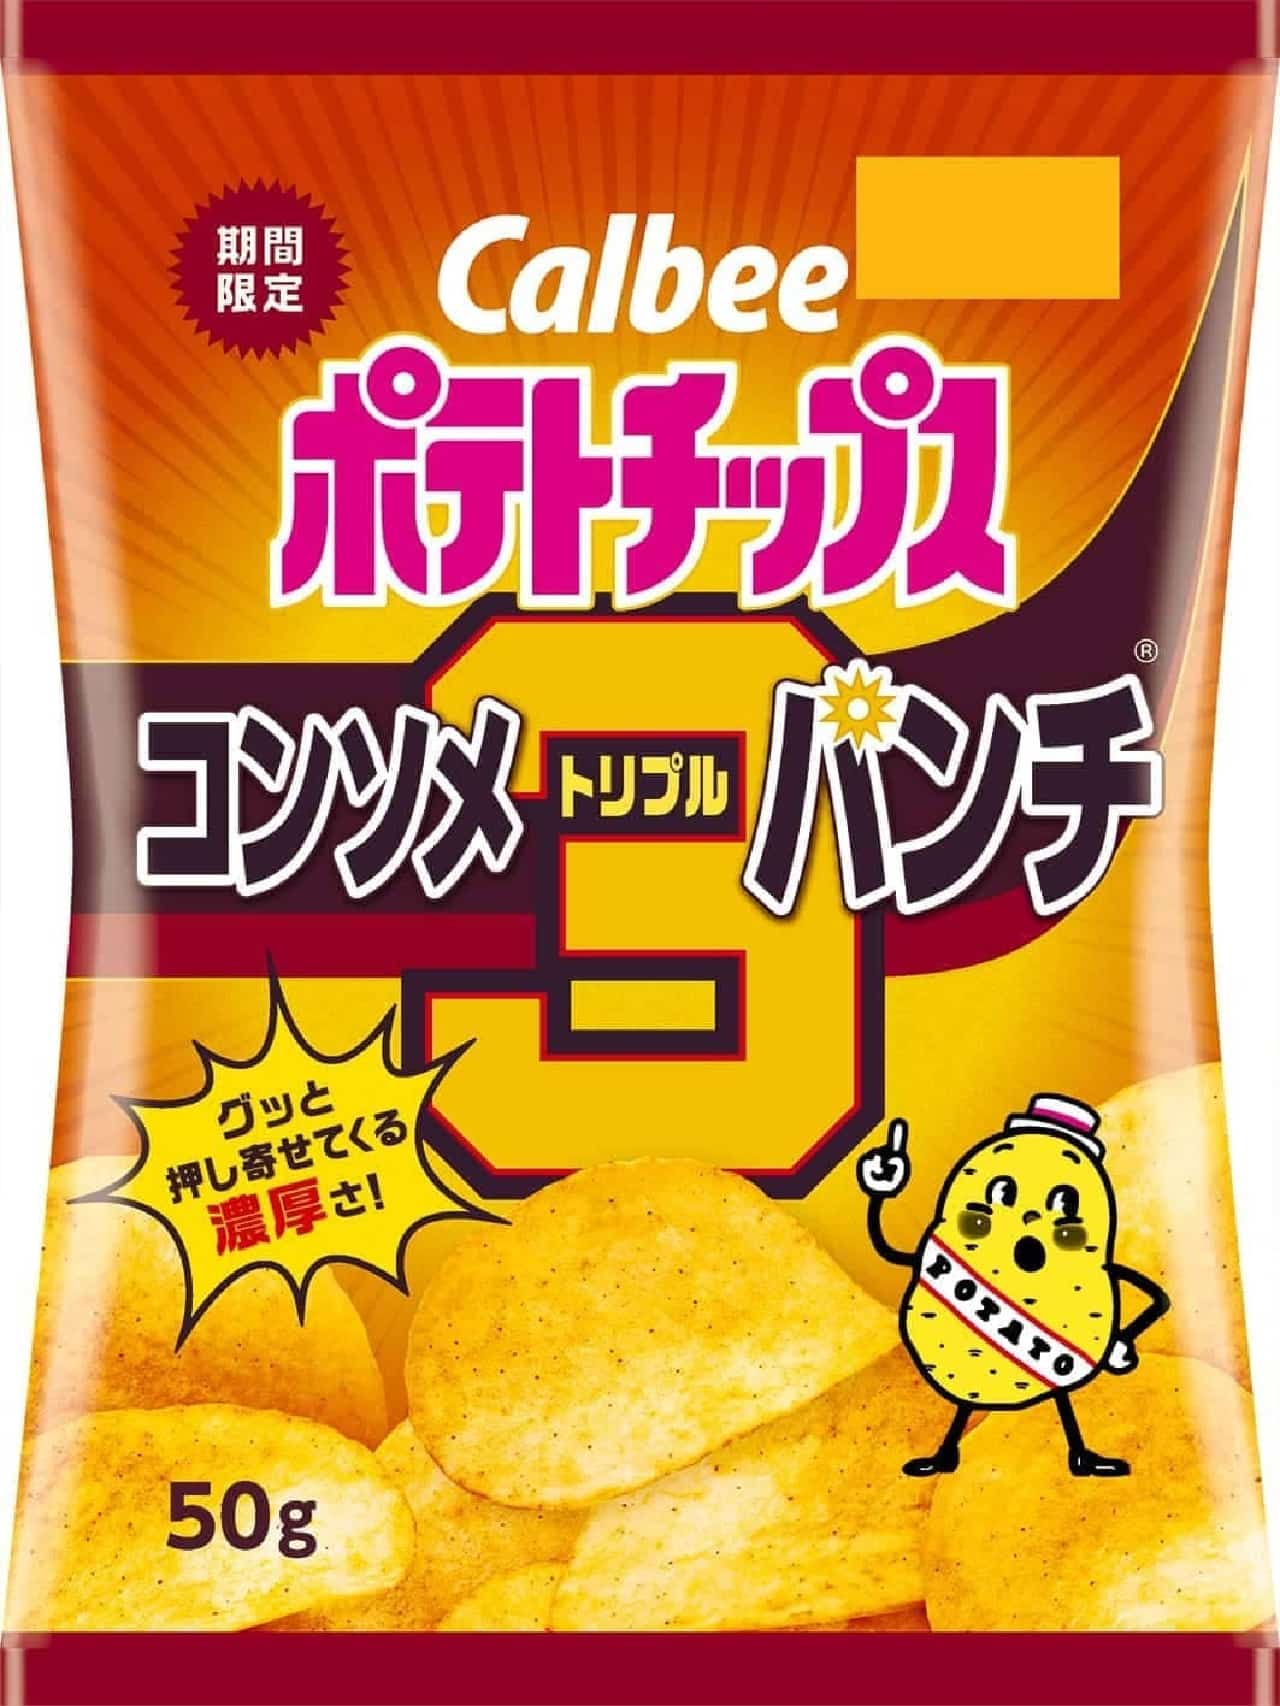 Calbee "Potato Chips Consomme Triple Punch"